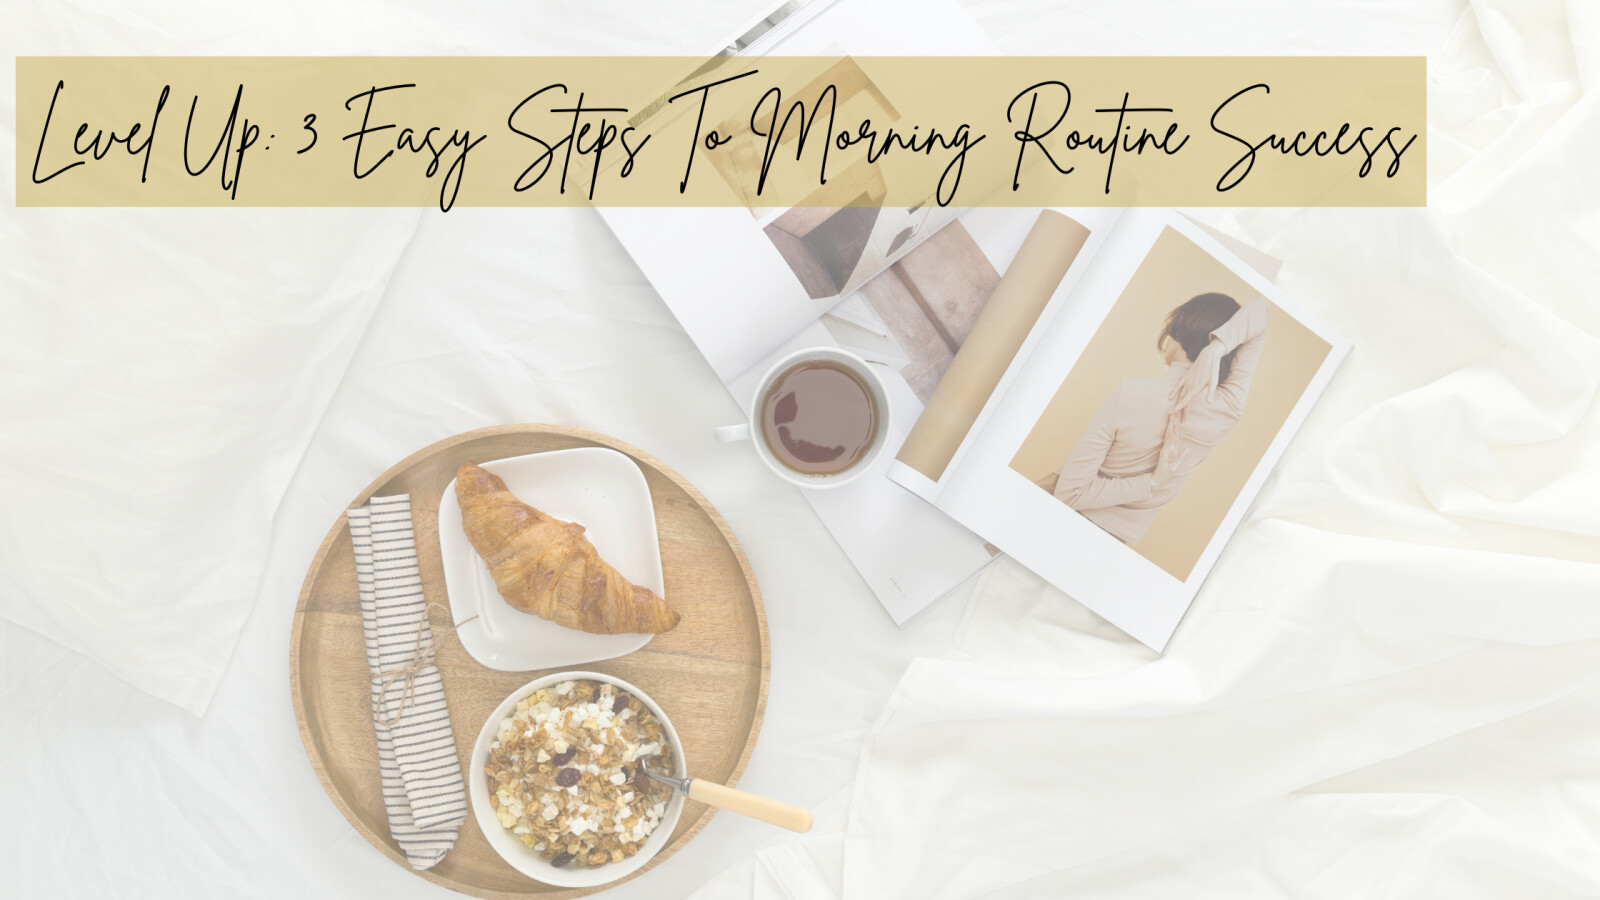 3 Easy Steps To Morning Routine Success